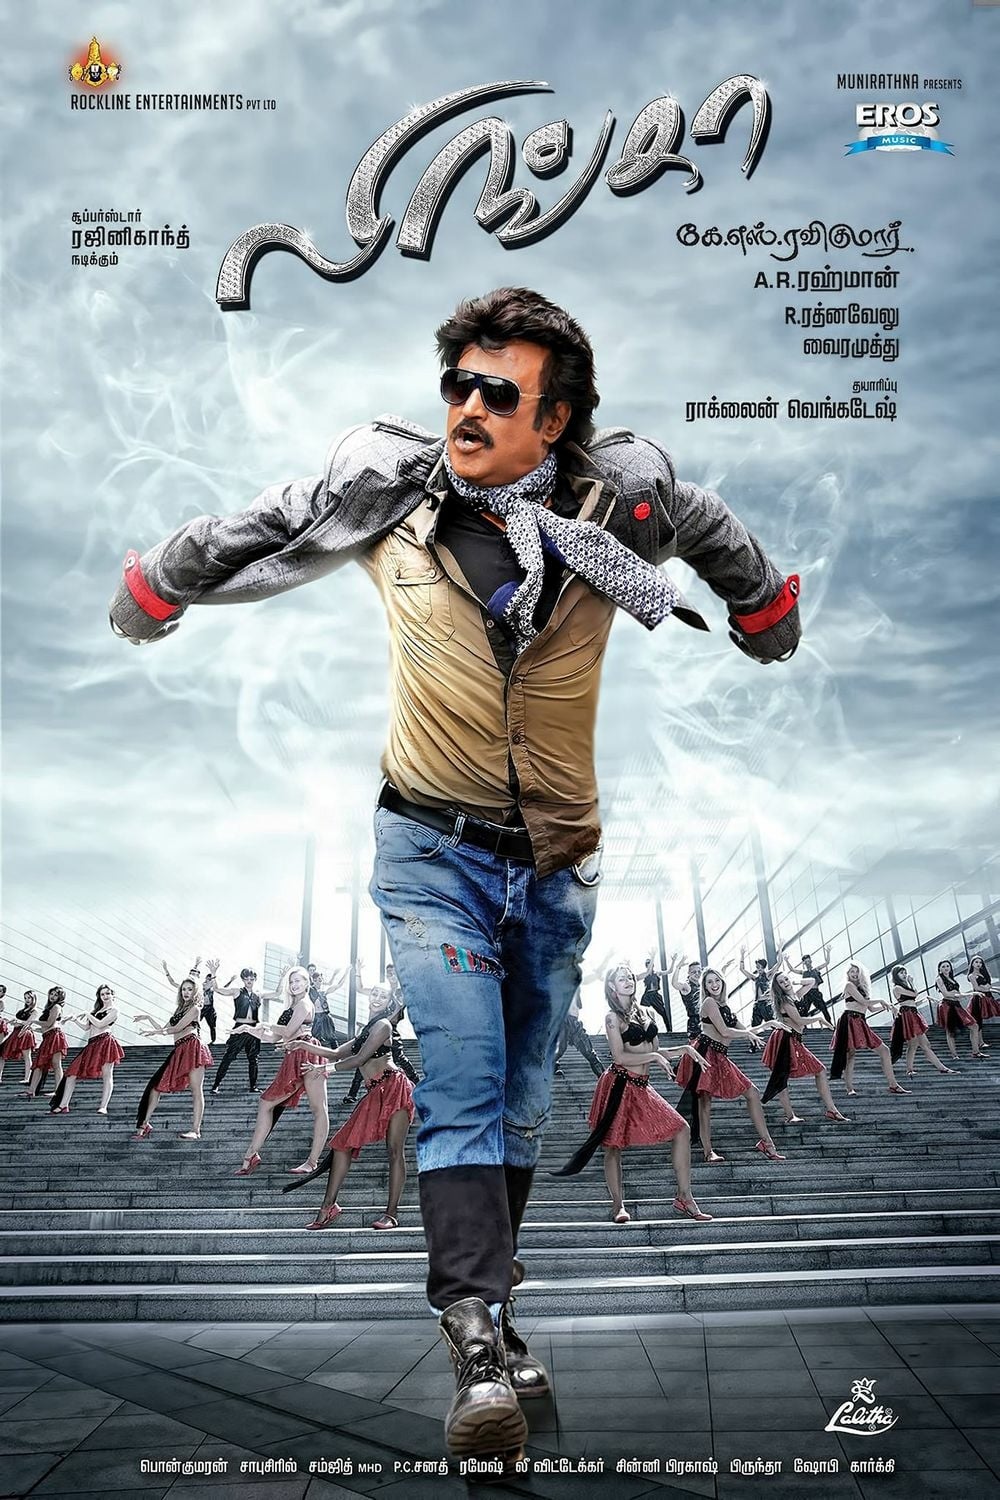 Poster for the movie "Lingaa"